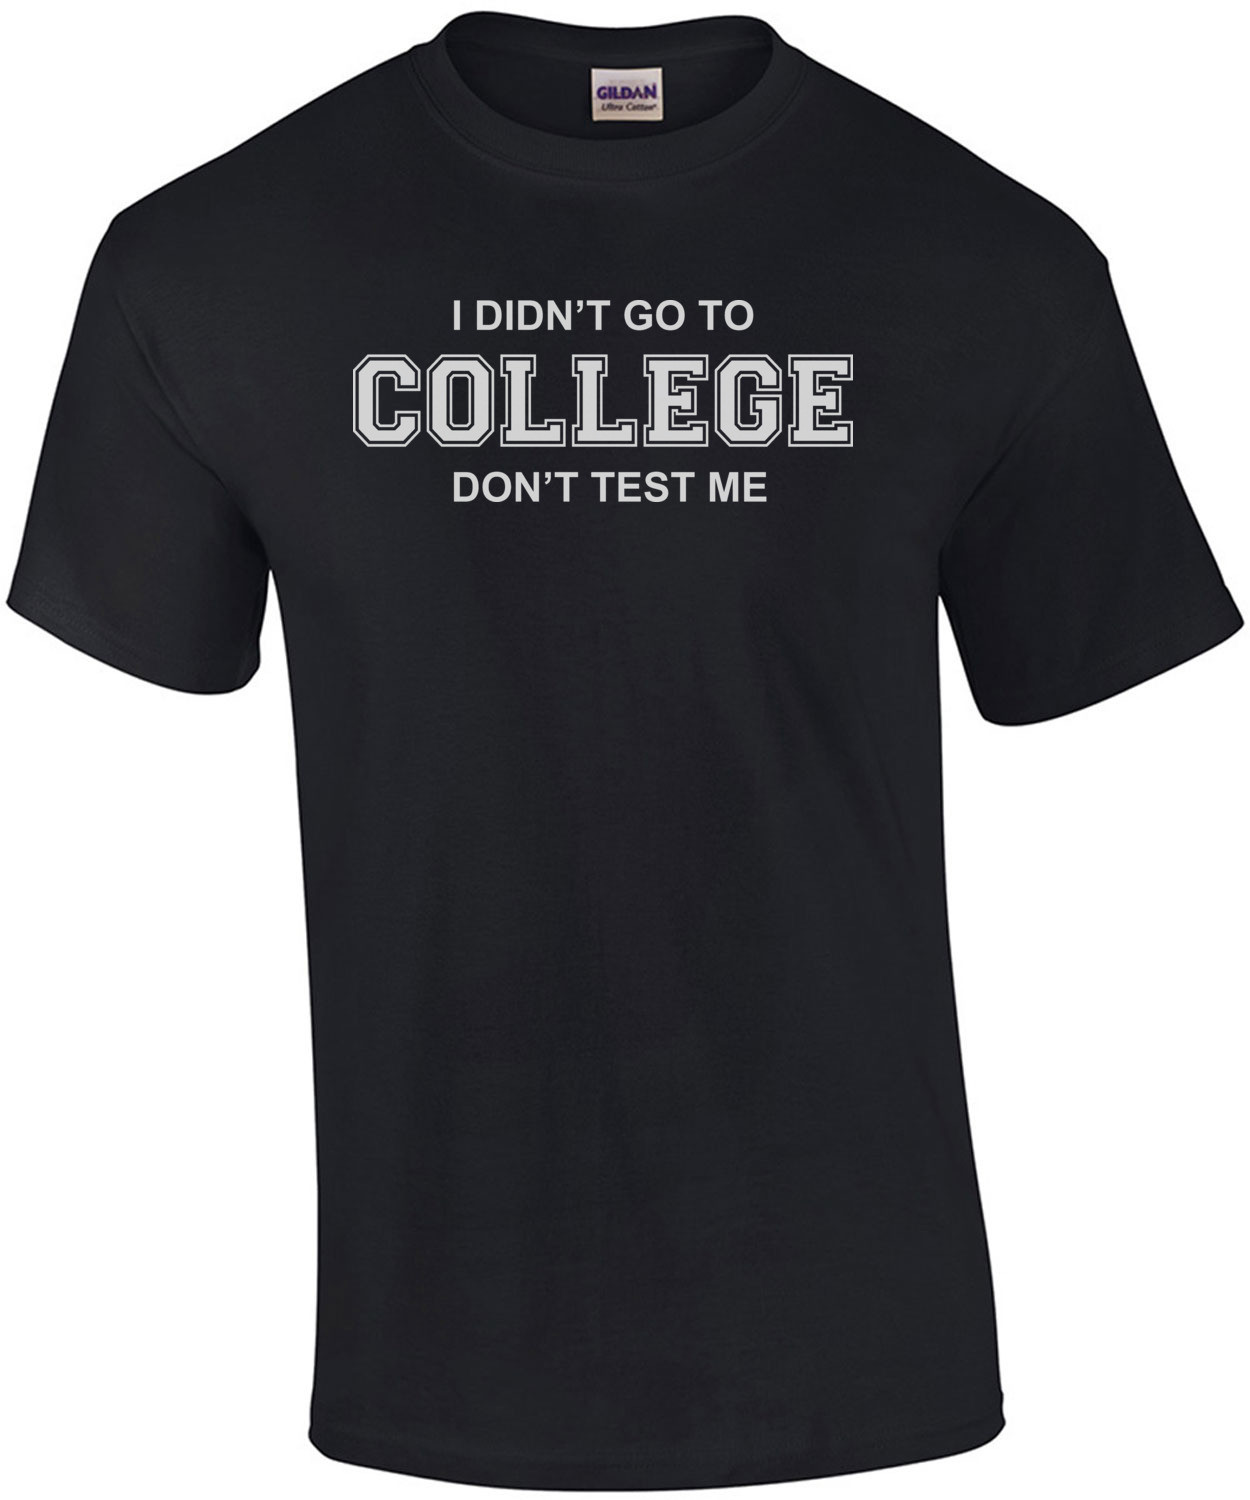 I Didn't Go To College Don't Test Me